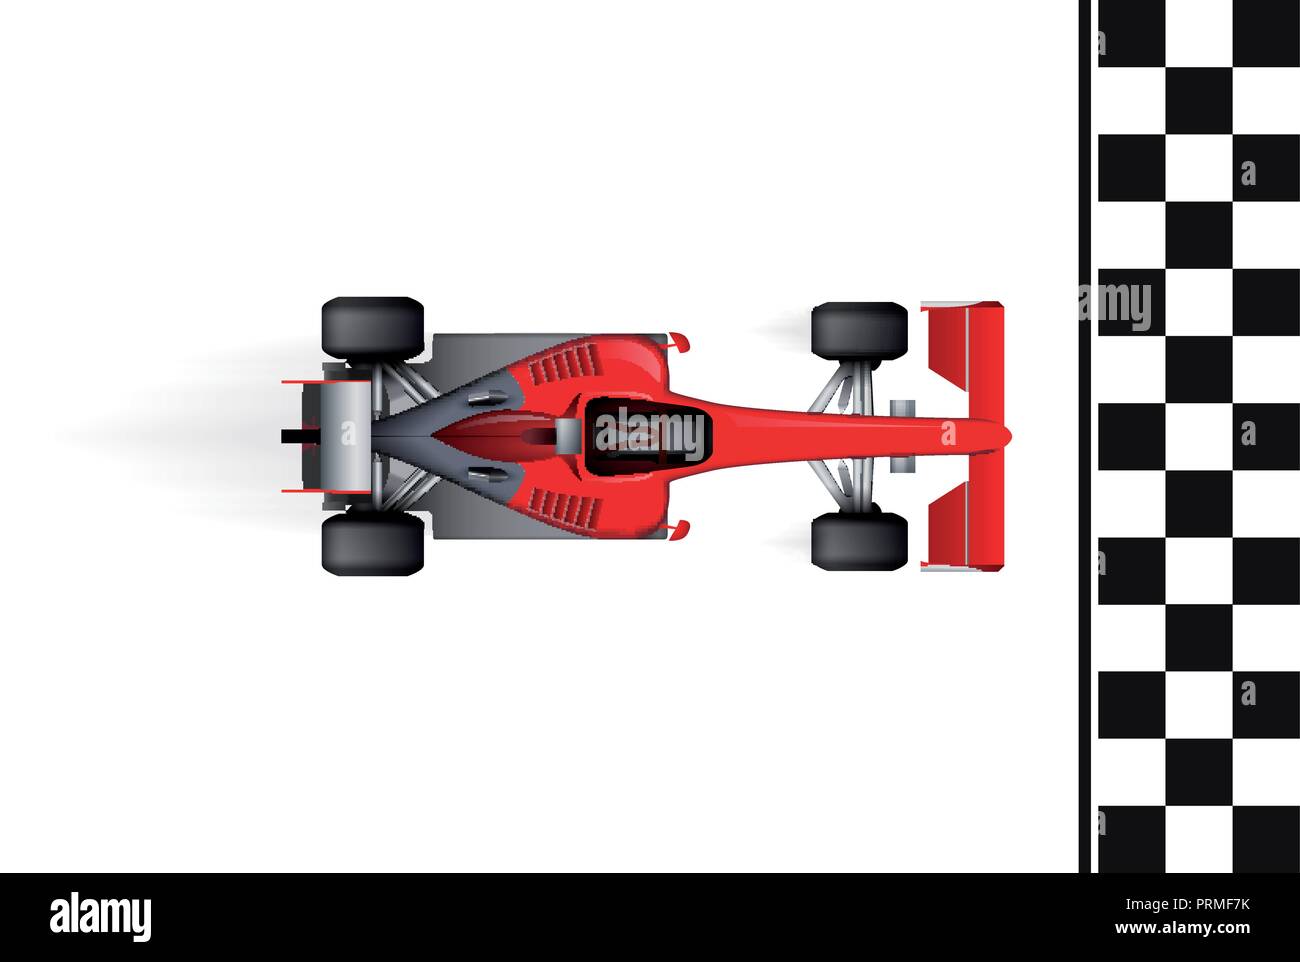 F1 - Formula one competition - racing car as running time concept Stock Vector